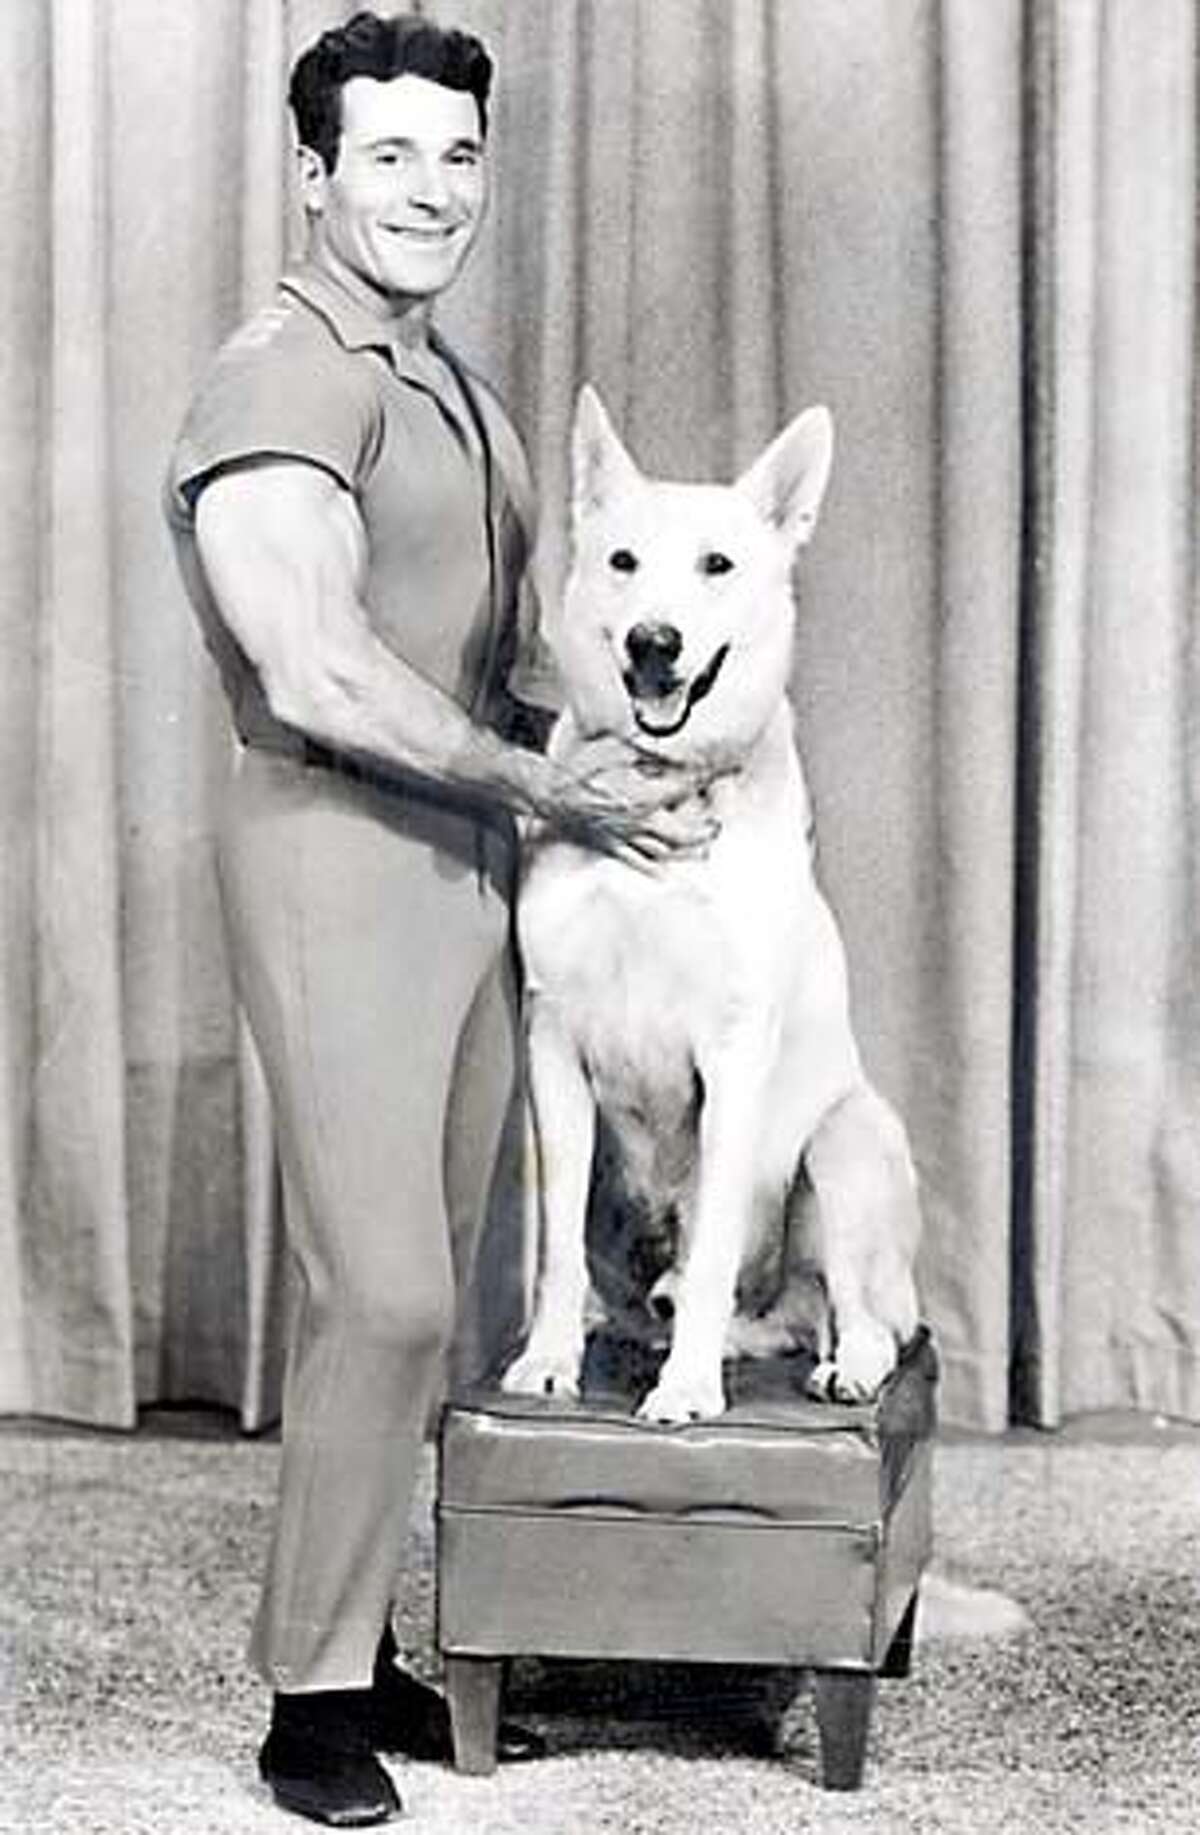 LaLanne in his heyday with his dog Happy.